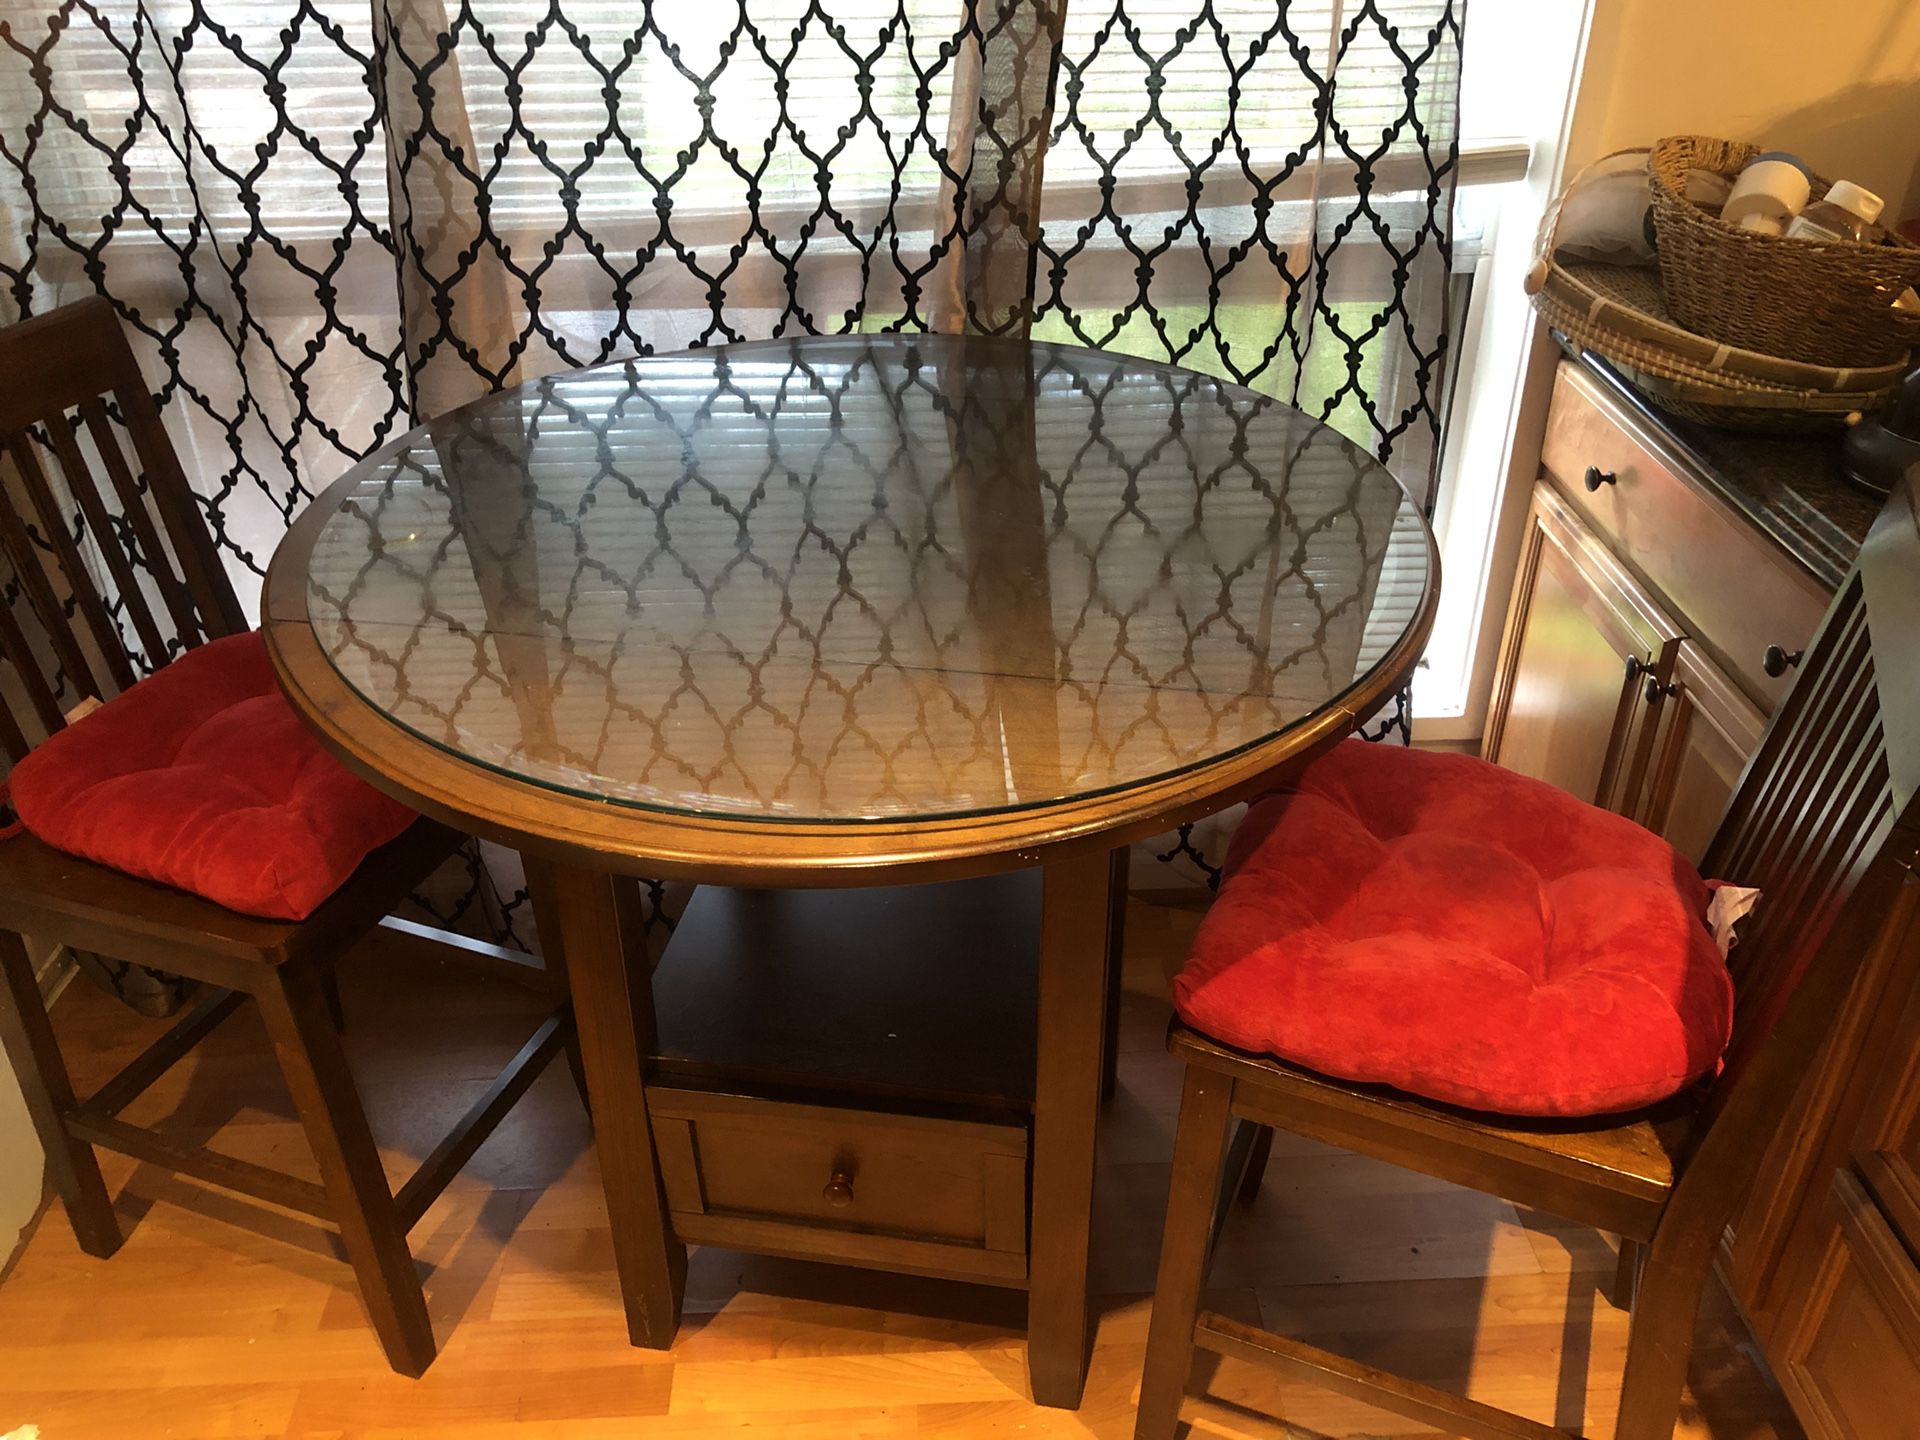 Bar table with stool chairs